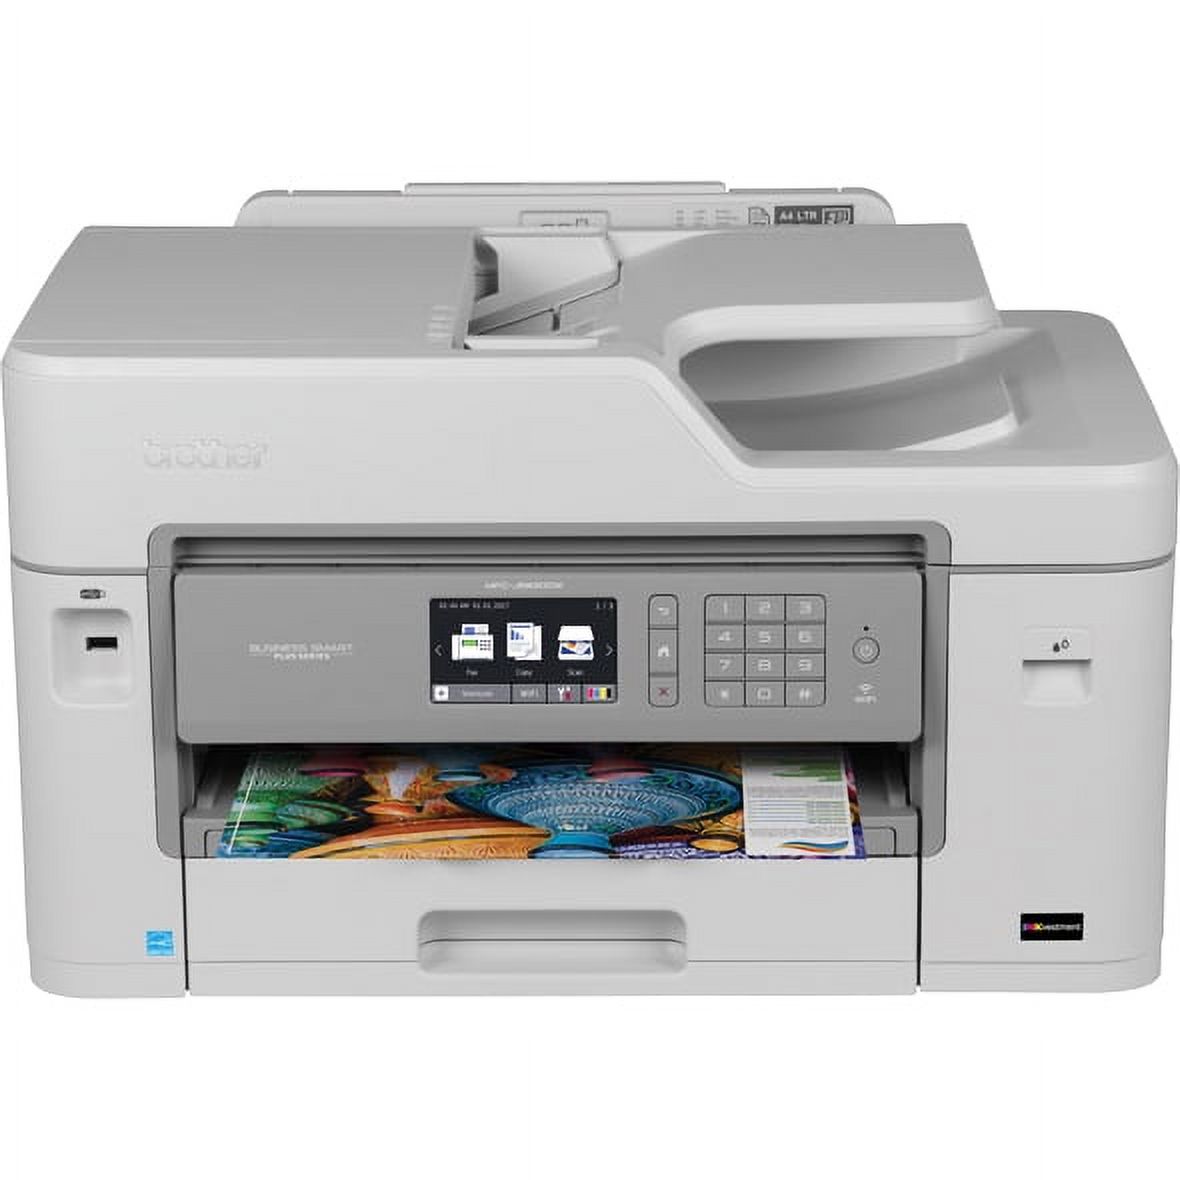 Brother MFC-J5830DW Business Plus All-in-One Printer - image 4 of 9